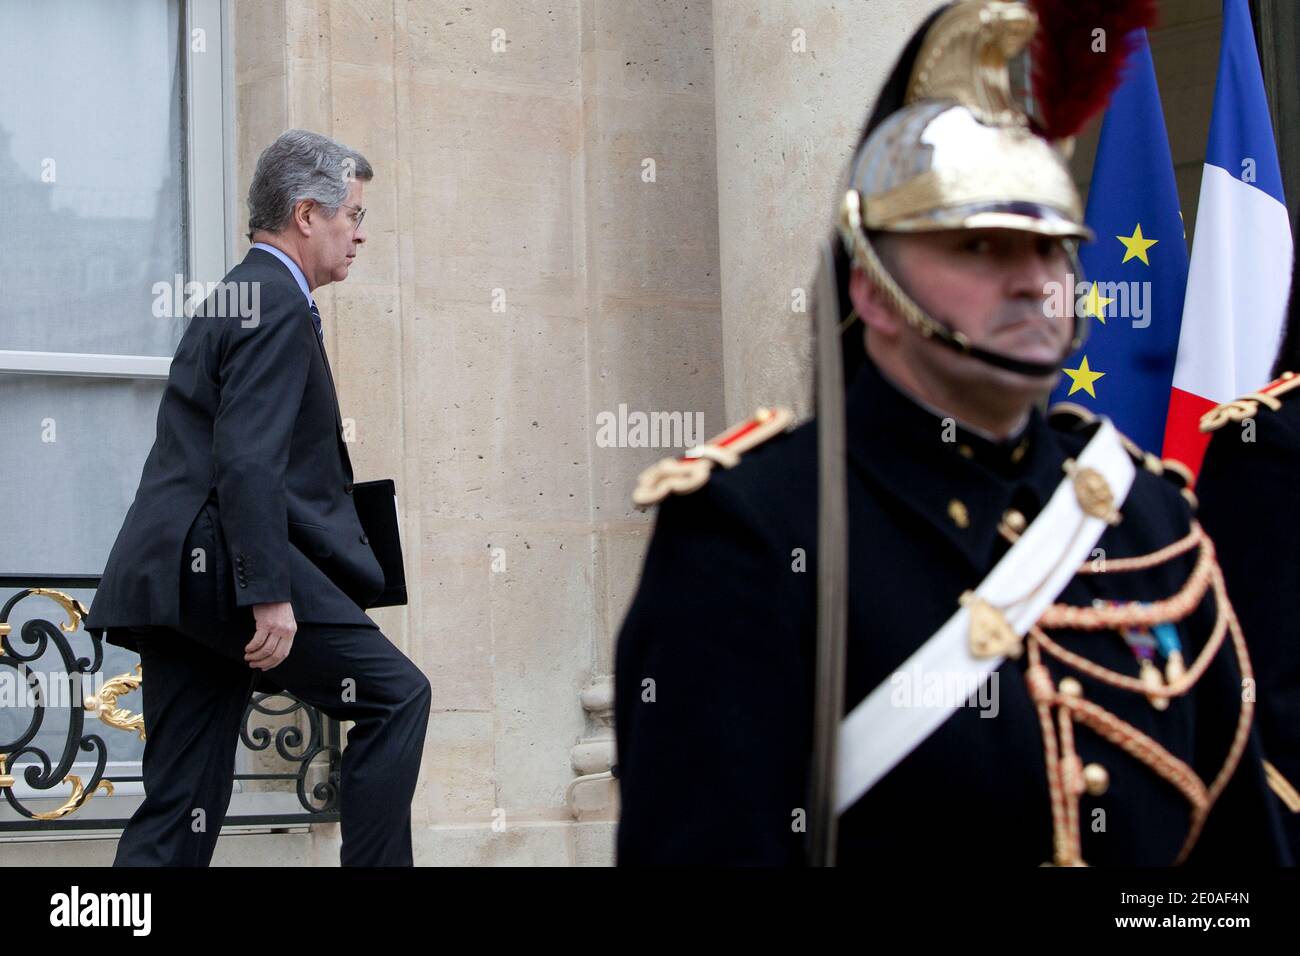 French President's diplomatic advisor and sherpa Jean-David Levitte arrives at the Elysee Palace prior to a meeting with French President Nicolas Sarkozy and Belgium Prime Minister Elio Di Rupo, in Paris, France on February 24, 2012. Photo by Stephane Lemouton/ABACAPRESS.COM. Stock Photo